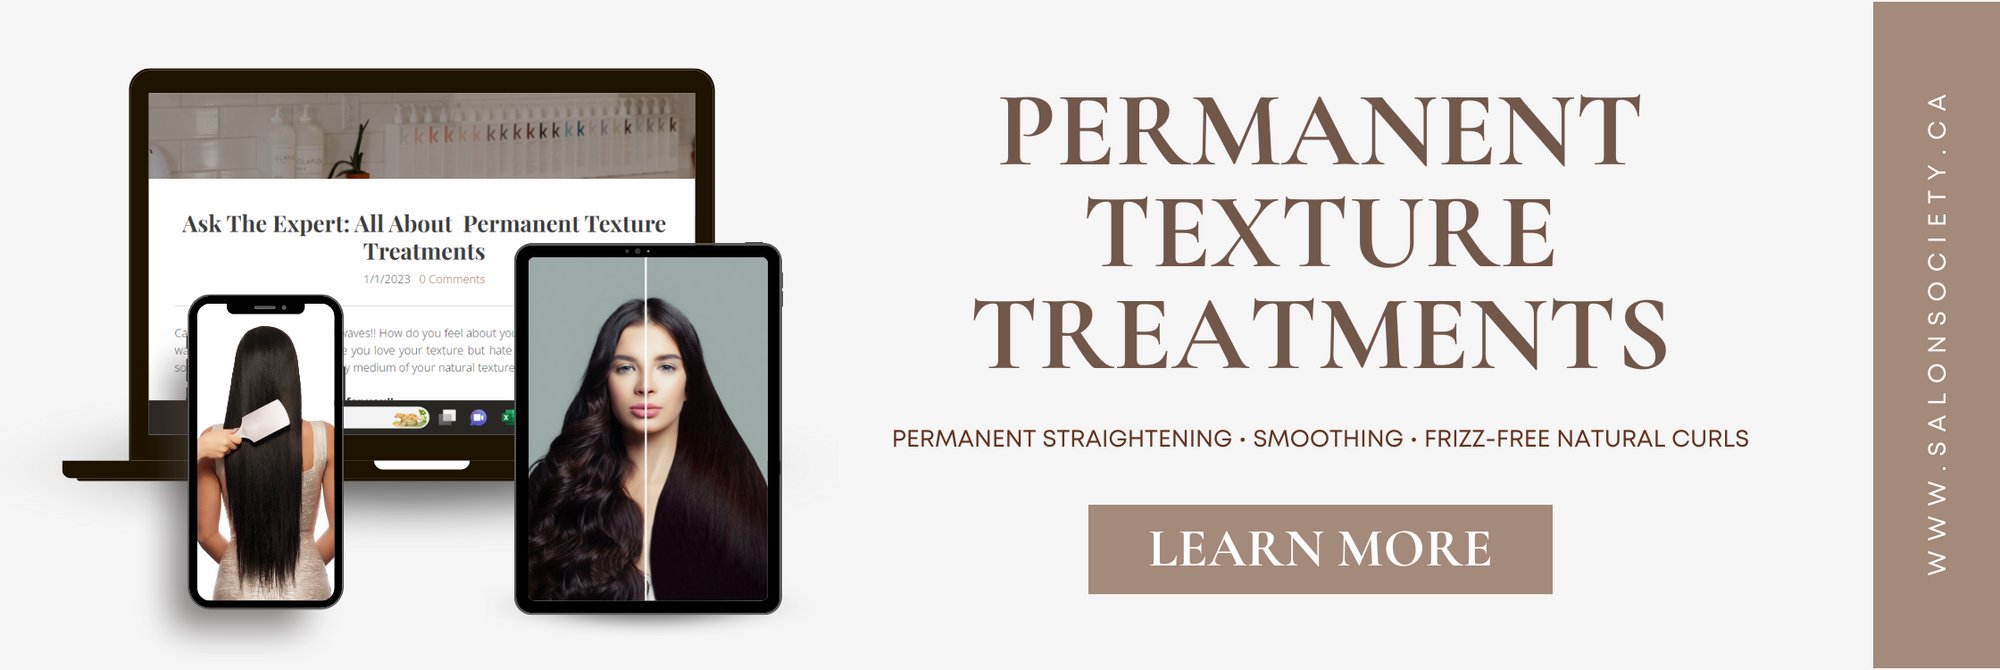 Permanent Texture Treatments - Permanent Straightening - Smoothing - Frizz-Free Natural Curls - Click to Learn More - www.salonsociety.ca